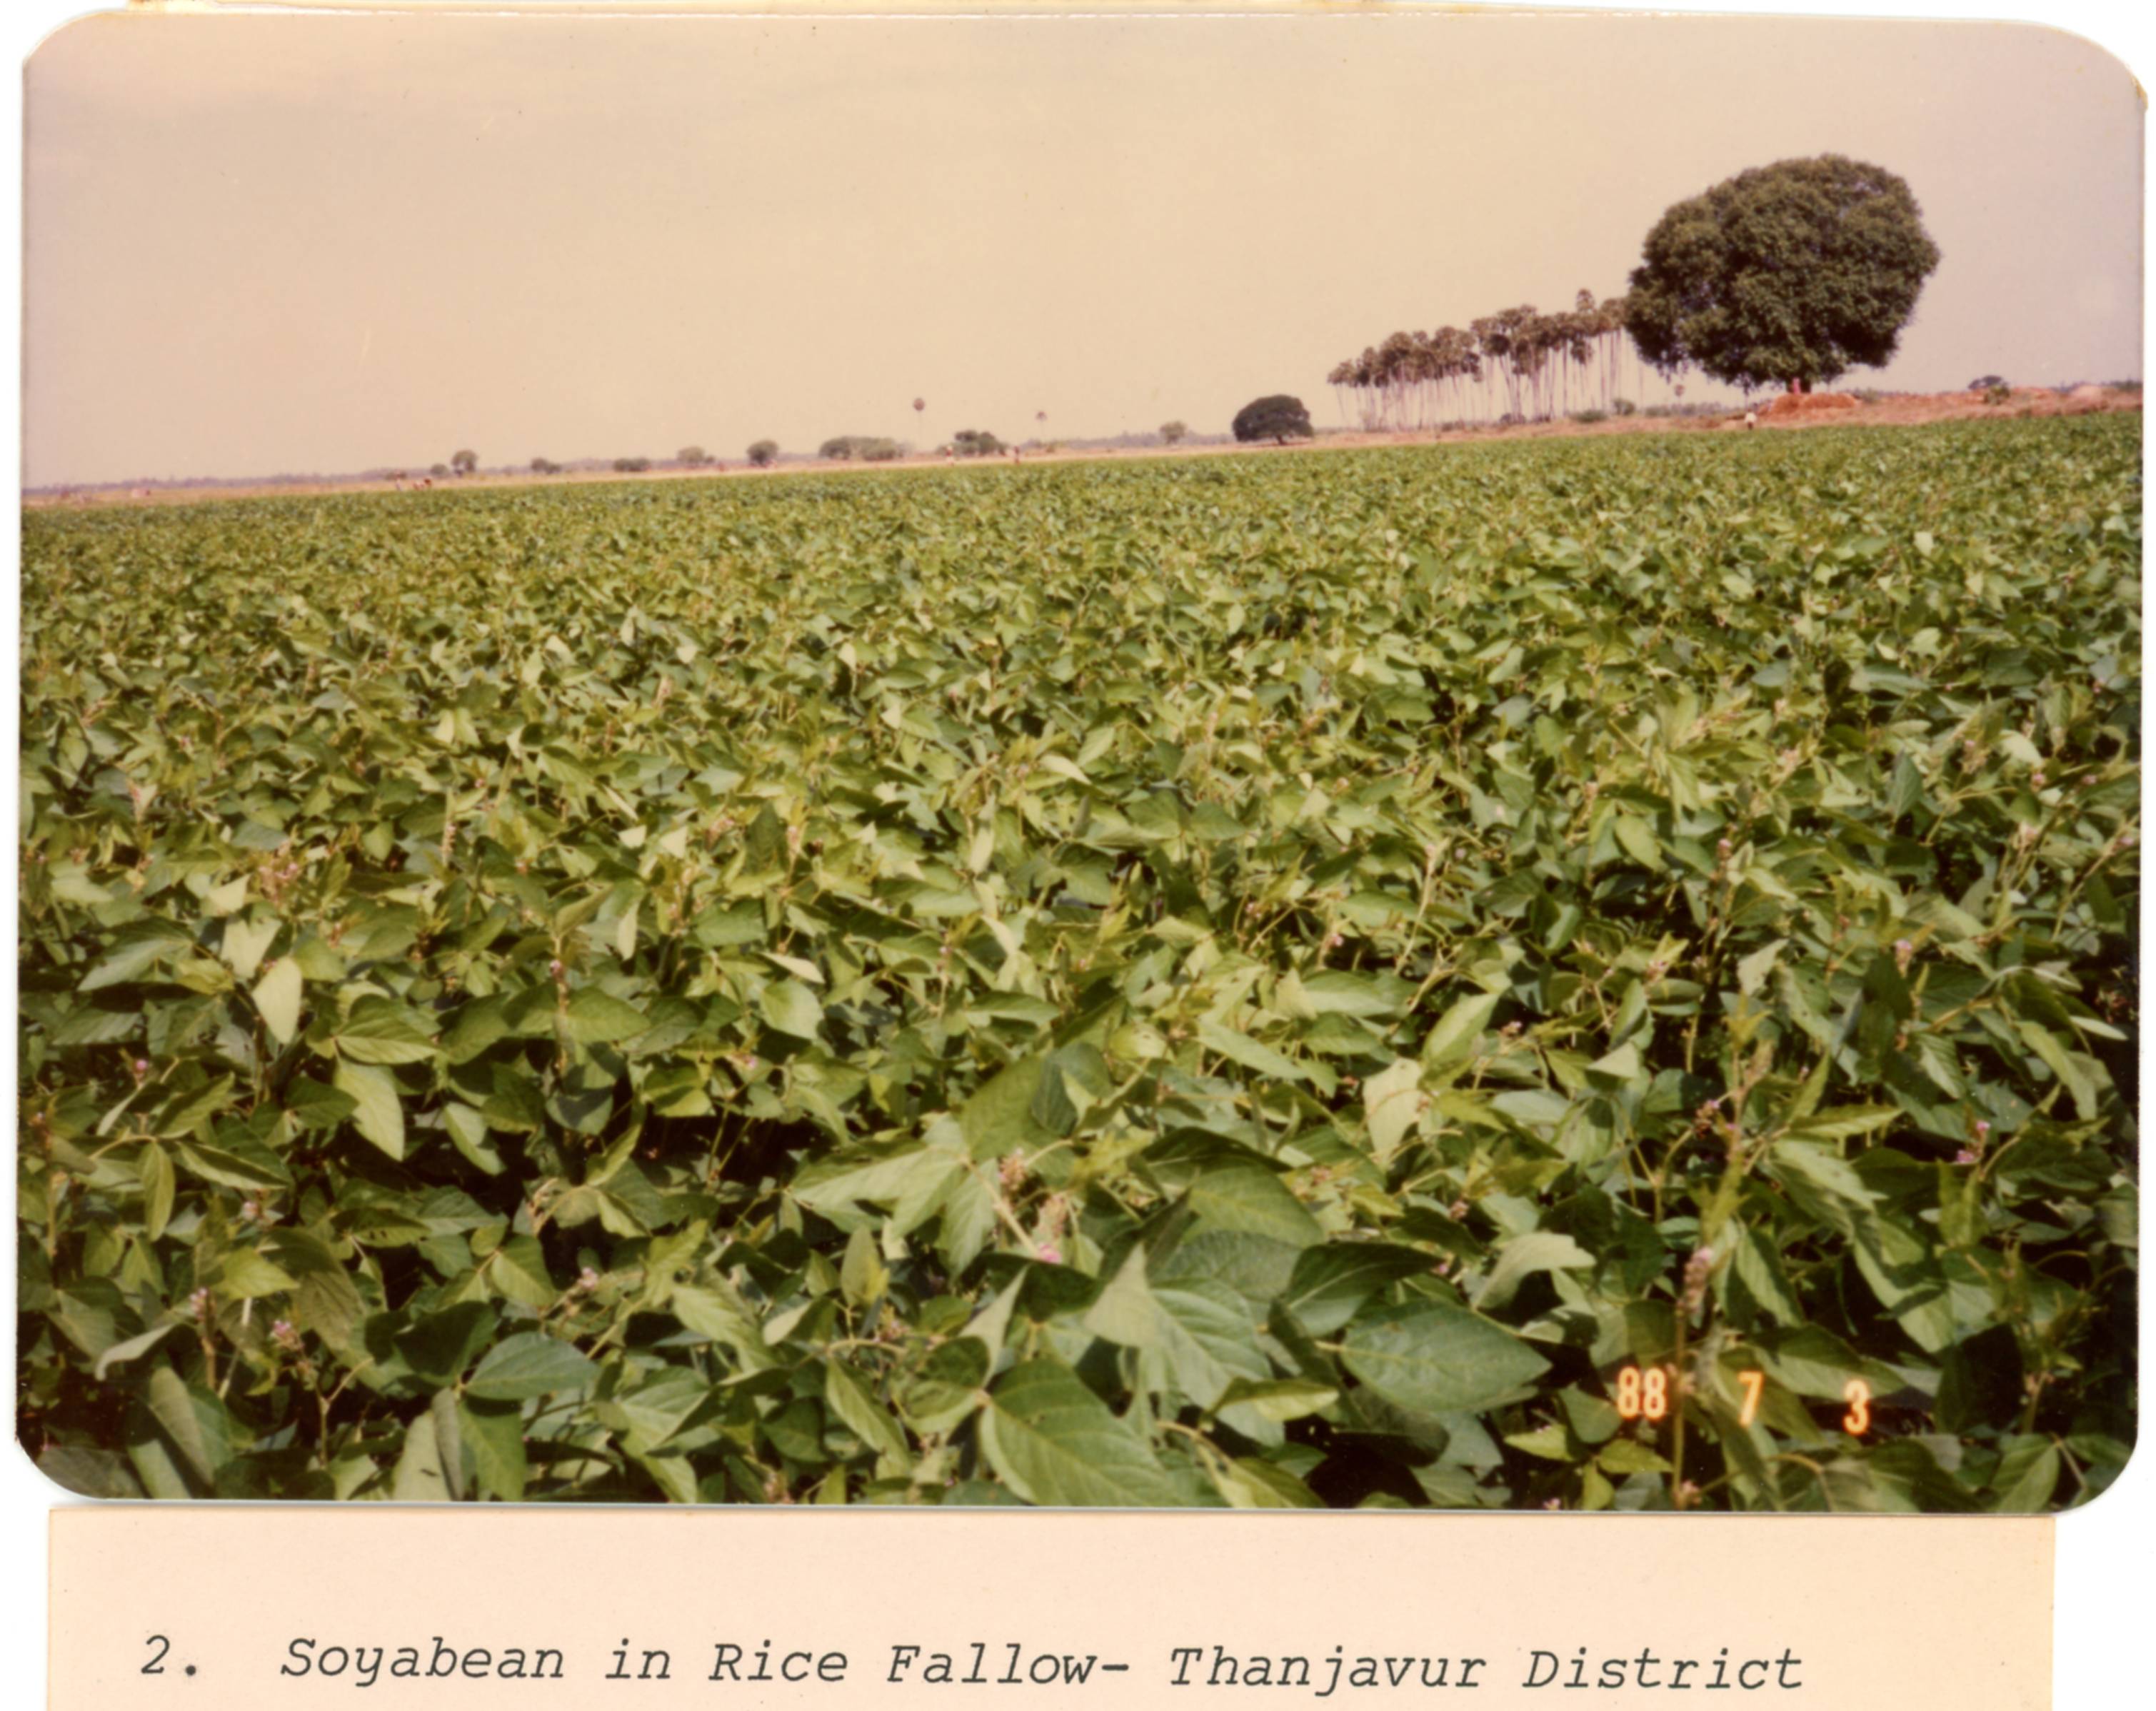 Photographs of crops from various regions in Tamil Nadu